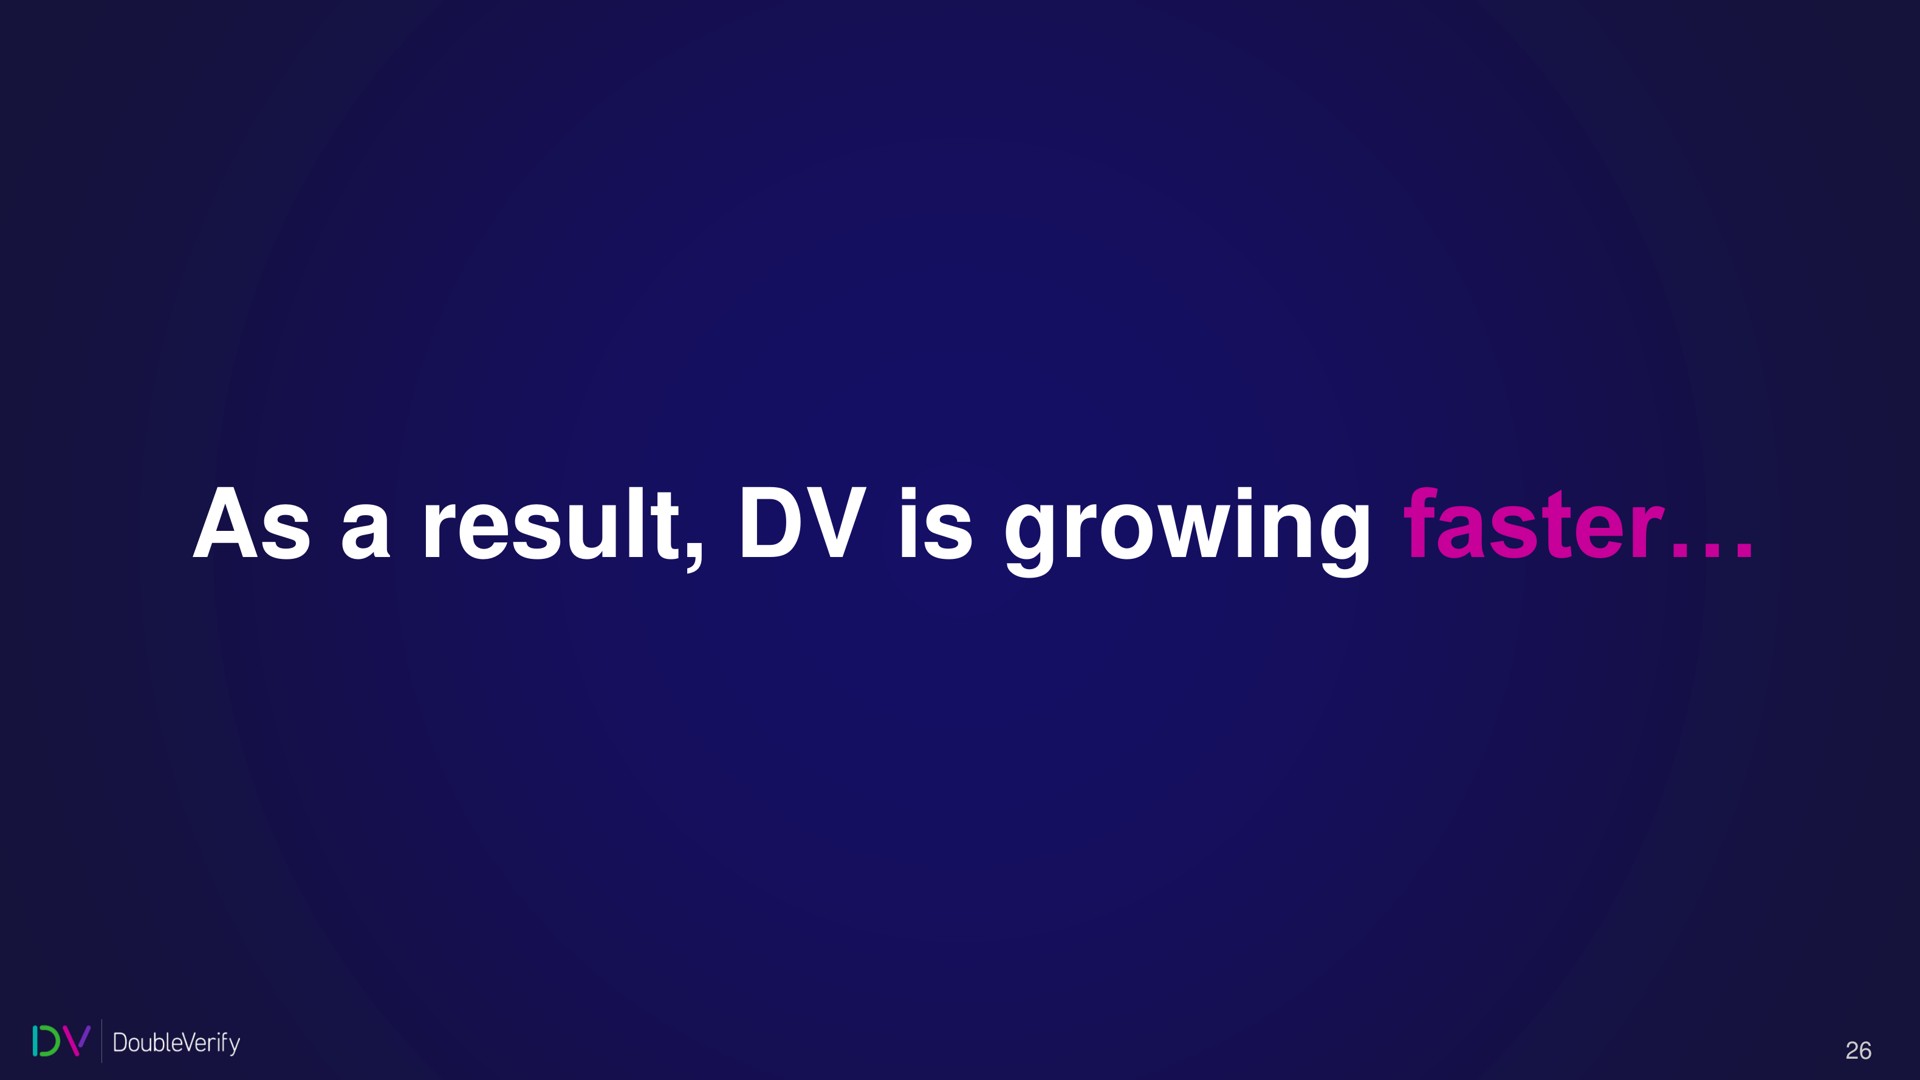 as a result is growing faster | DoubleVerify